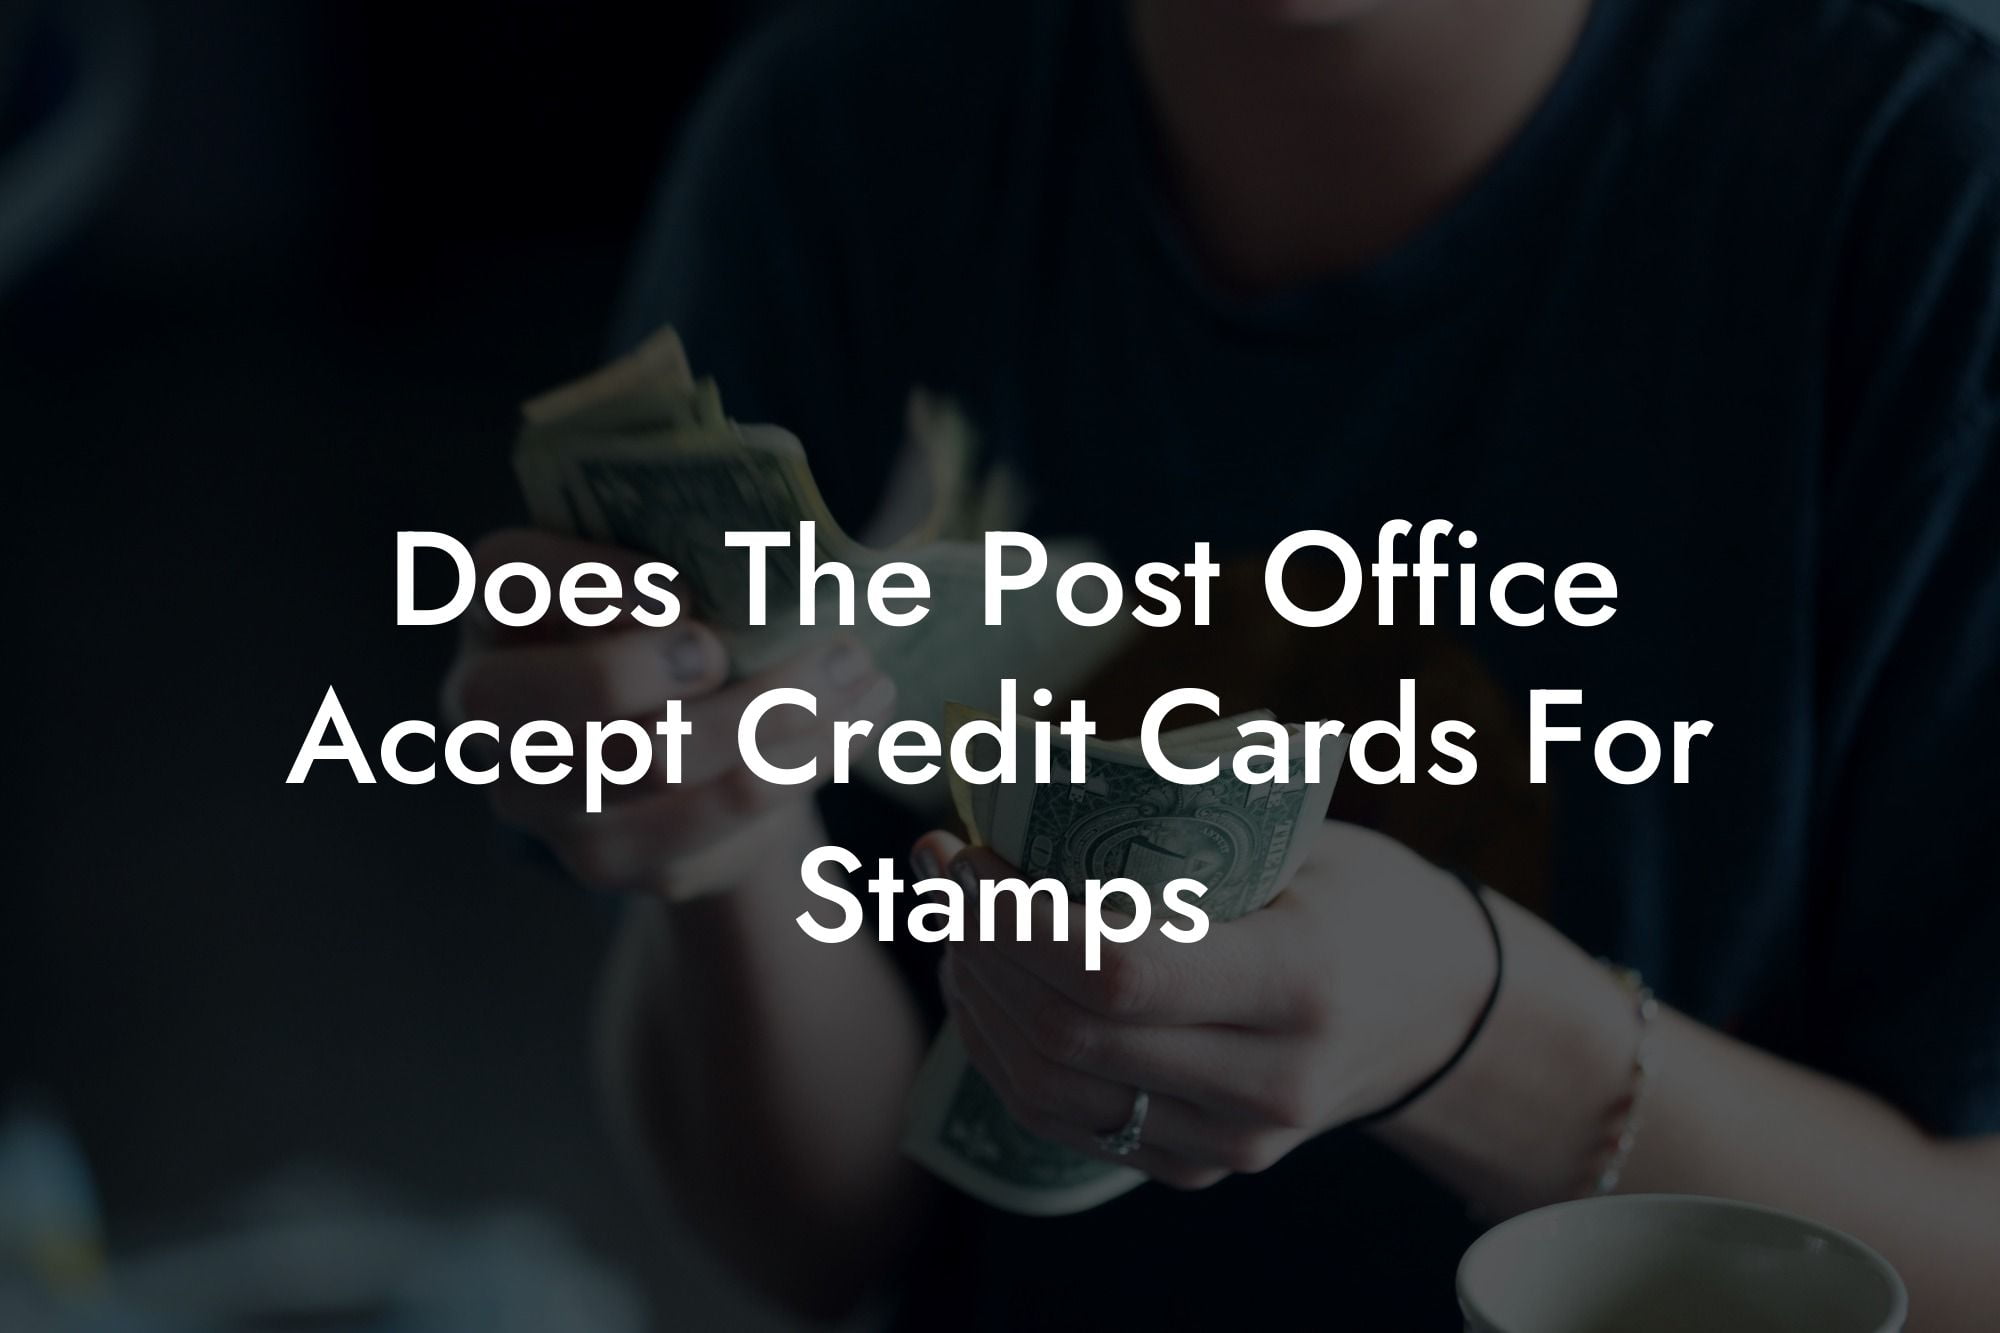 Does The Post Office Accept Credit Cards For Stamps